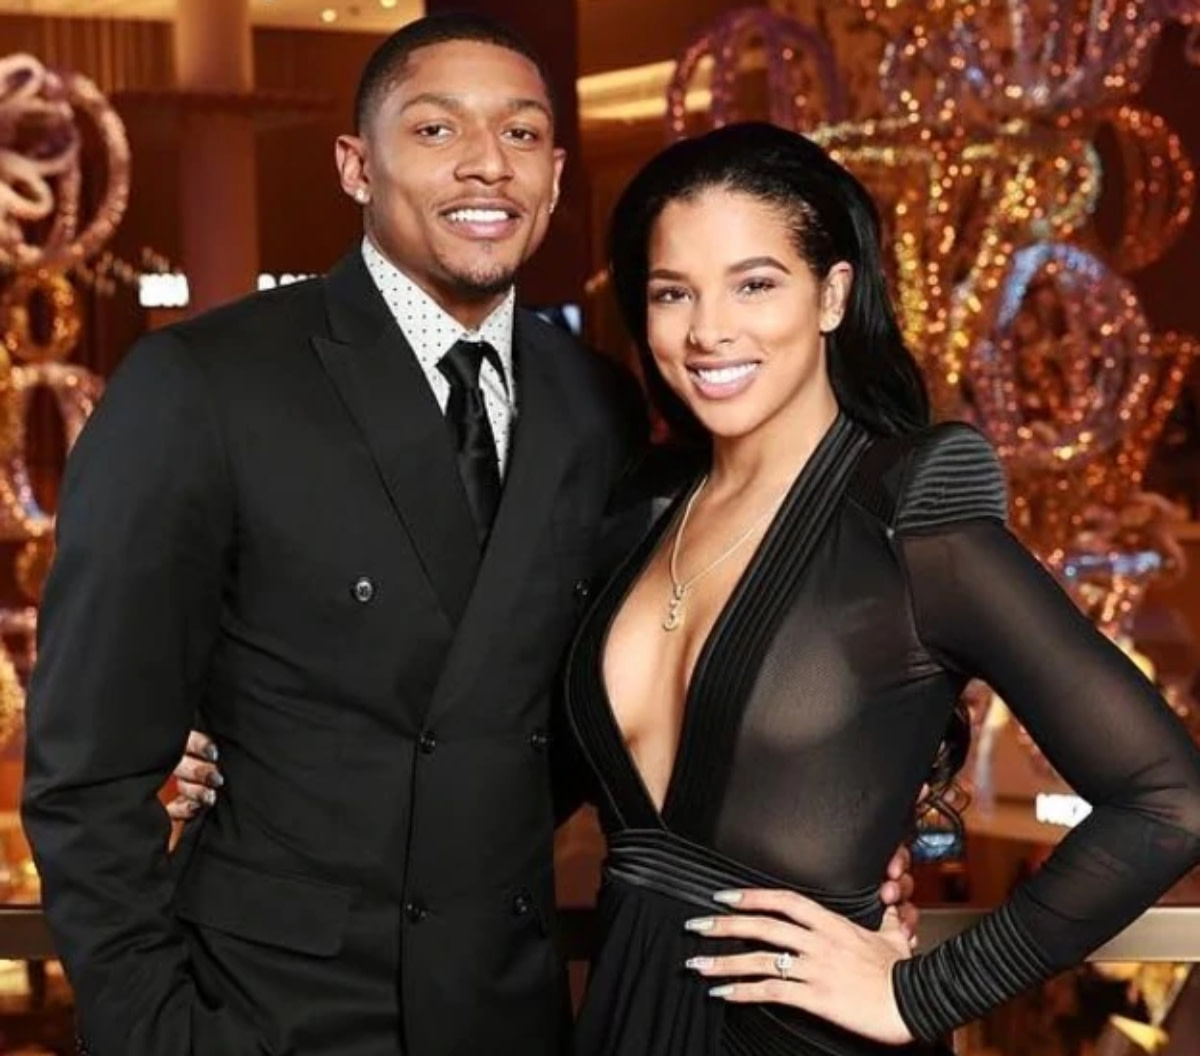 Bradley Beal's Wife Jokingly Calls Him A Sugar Daddy And Wishes Him For Father's Day On A Video: "The One Paying For All This."